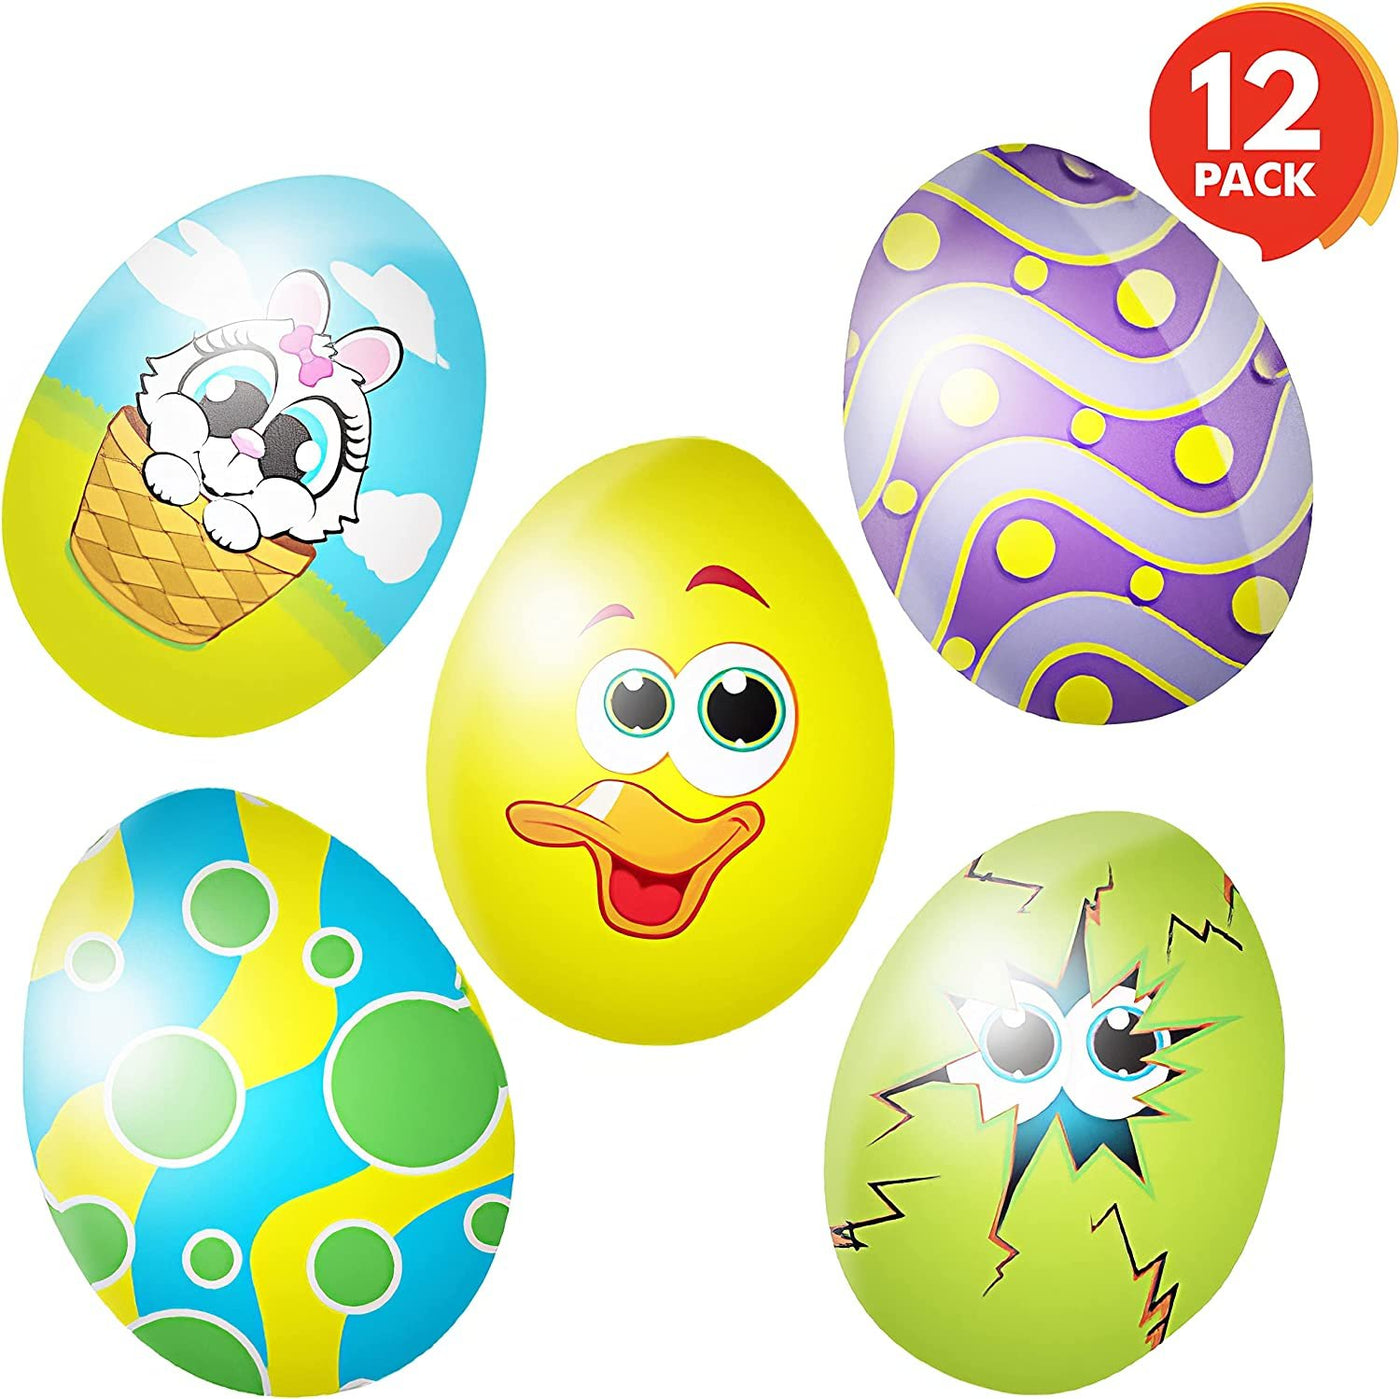 2.75" Easter Stress Relief Eggs - Set of 12 - Easter Themed Stress Relief Spongy Toy for Kids and Adults - Assorted Vibrant Colors - Egg Hunt Supplies, Party Favor for Boys and Girls